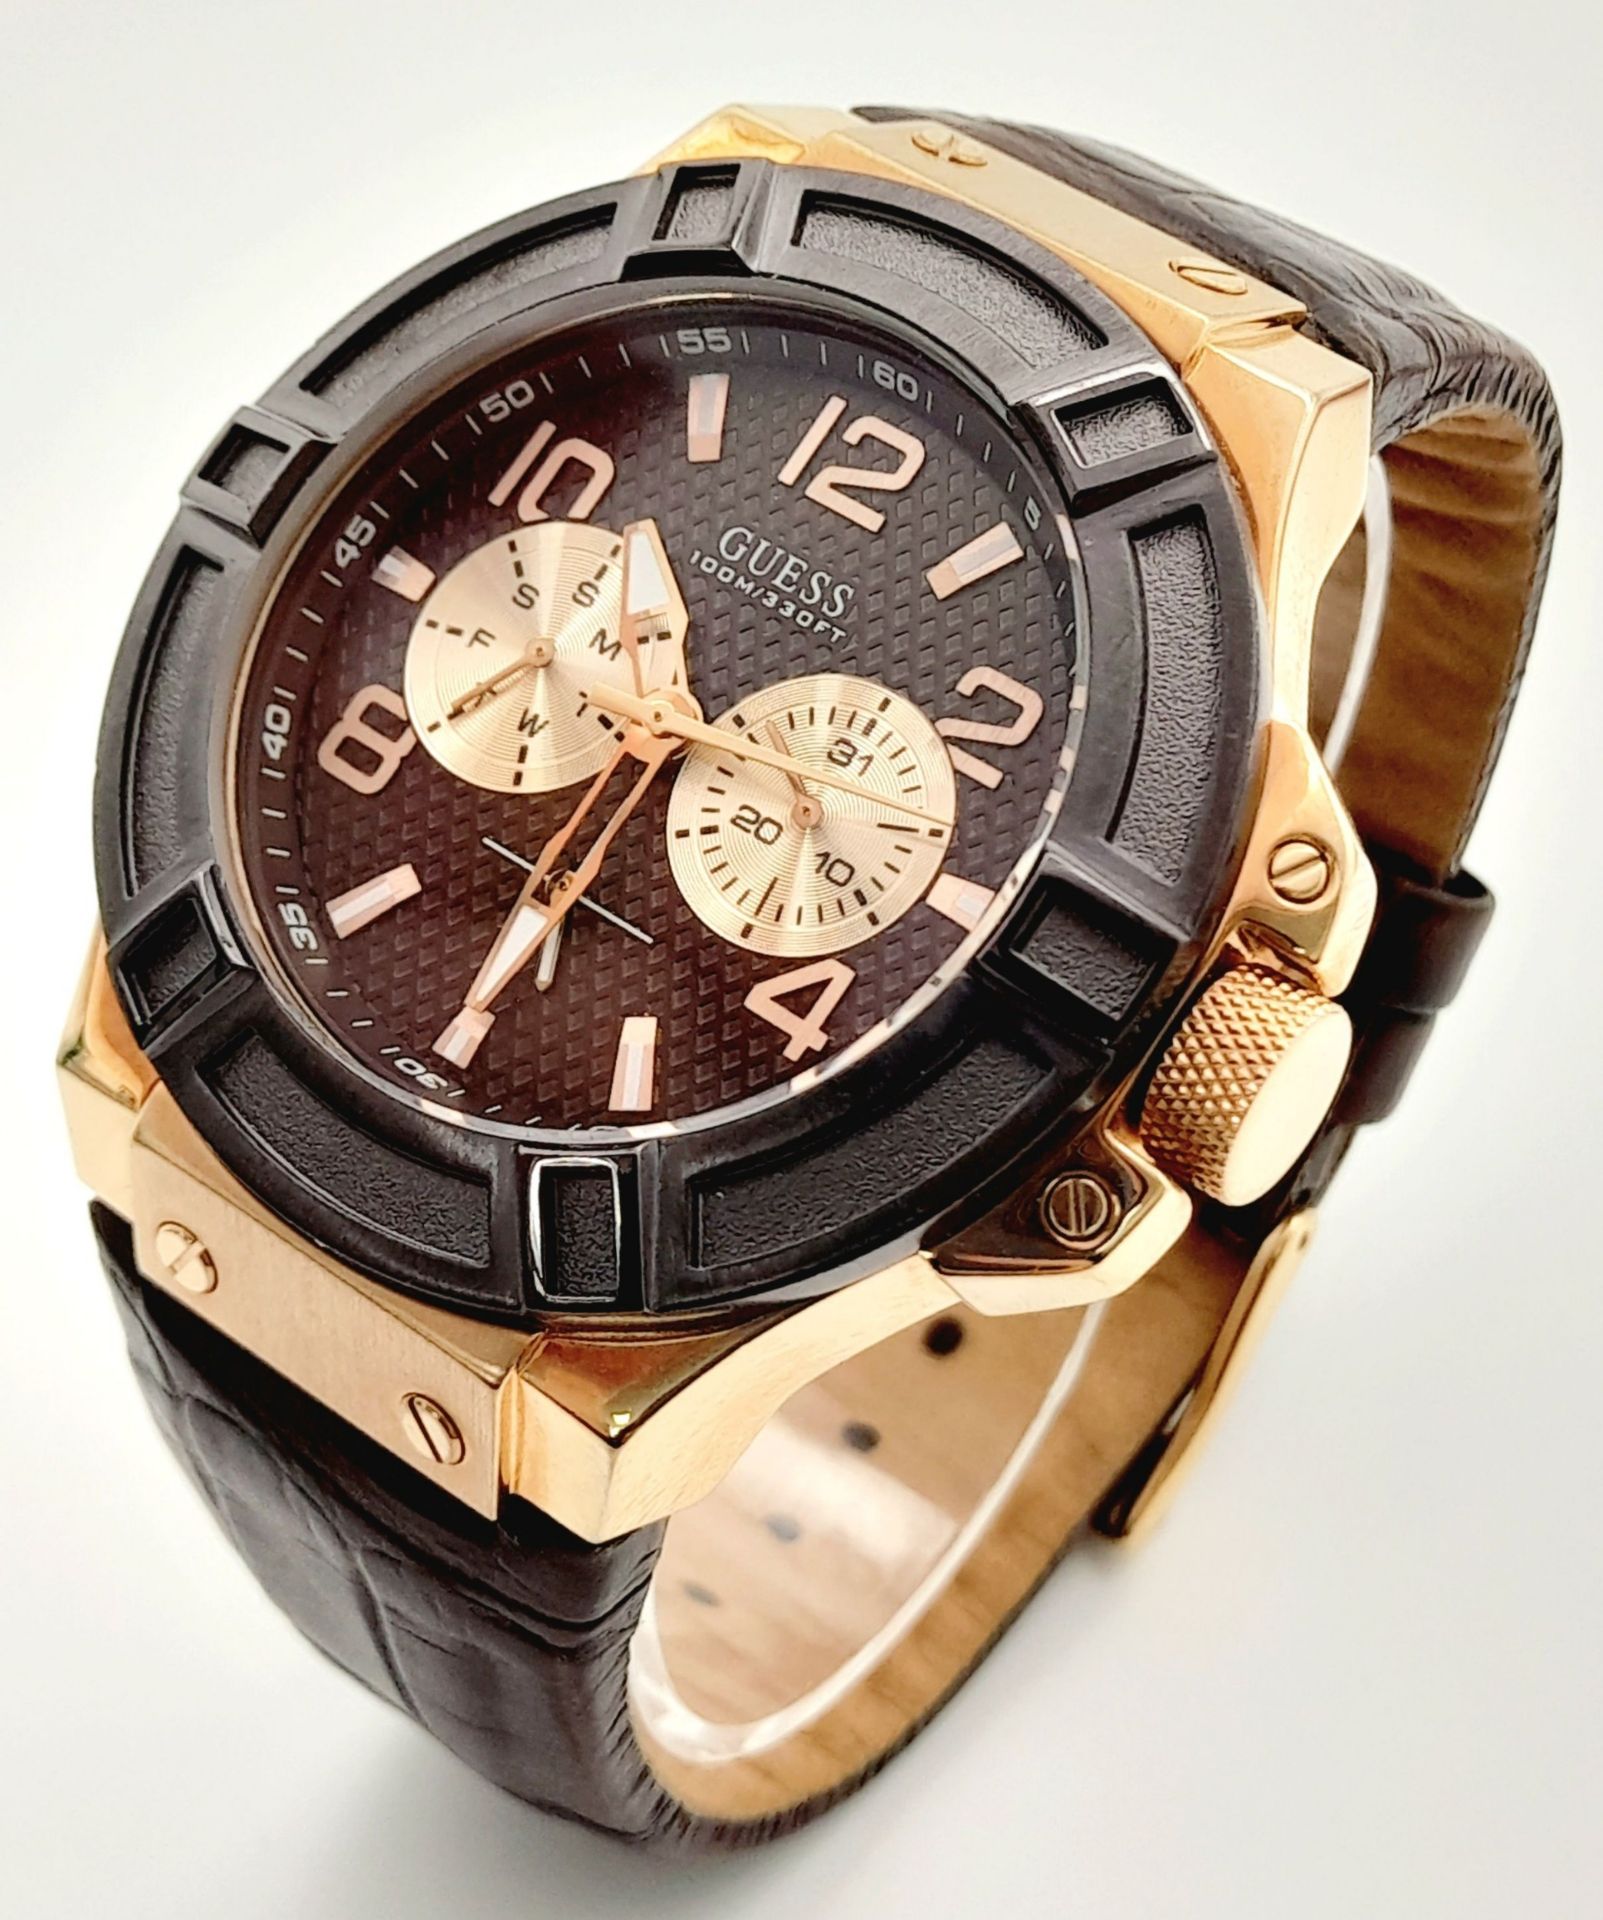 A Men’s Rose Gold-Toned Sports Fashion Watch by Guess (45mm Case). Full Working Order. - Bild 2 aus 6